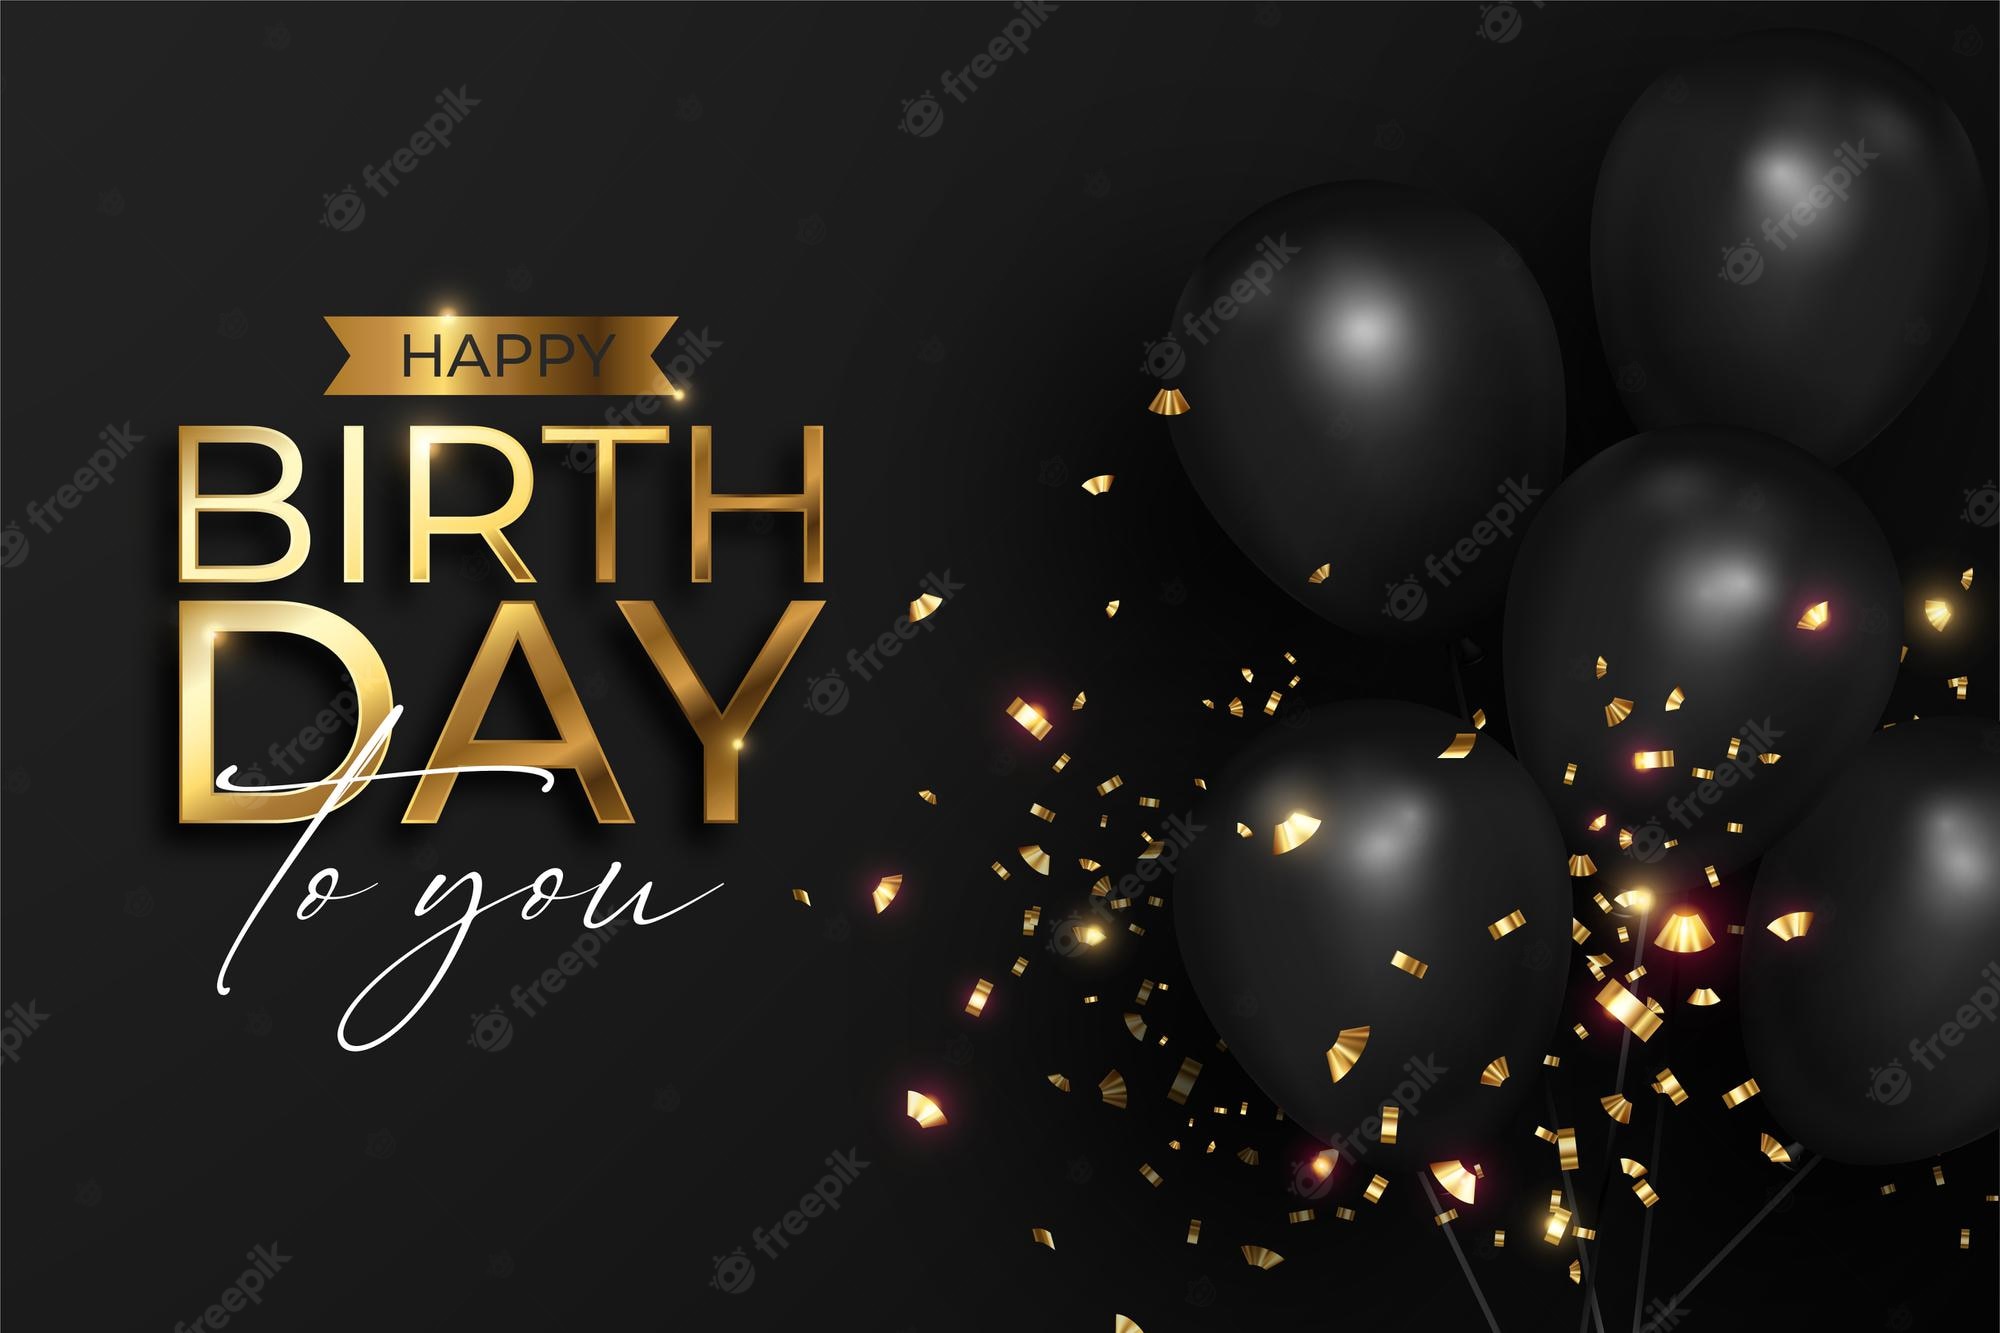 Download Free 100 + happy birthday wallpaper hd Wallpapers